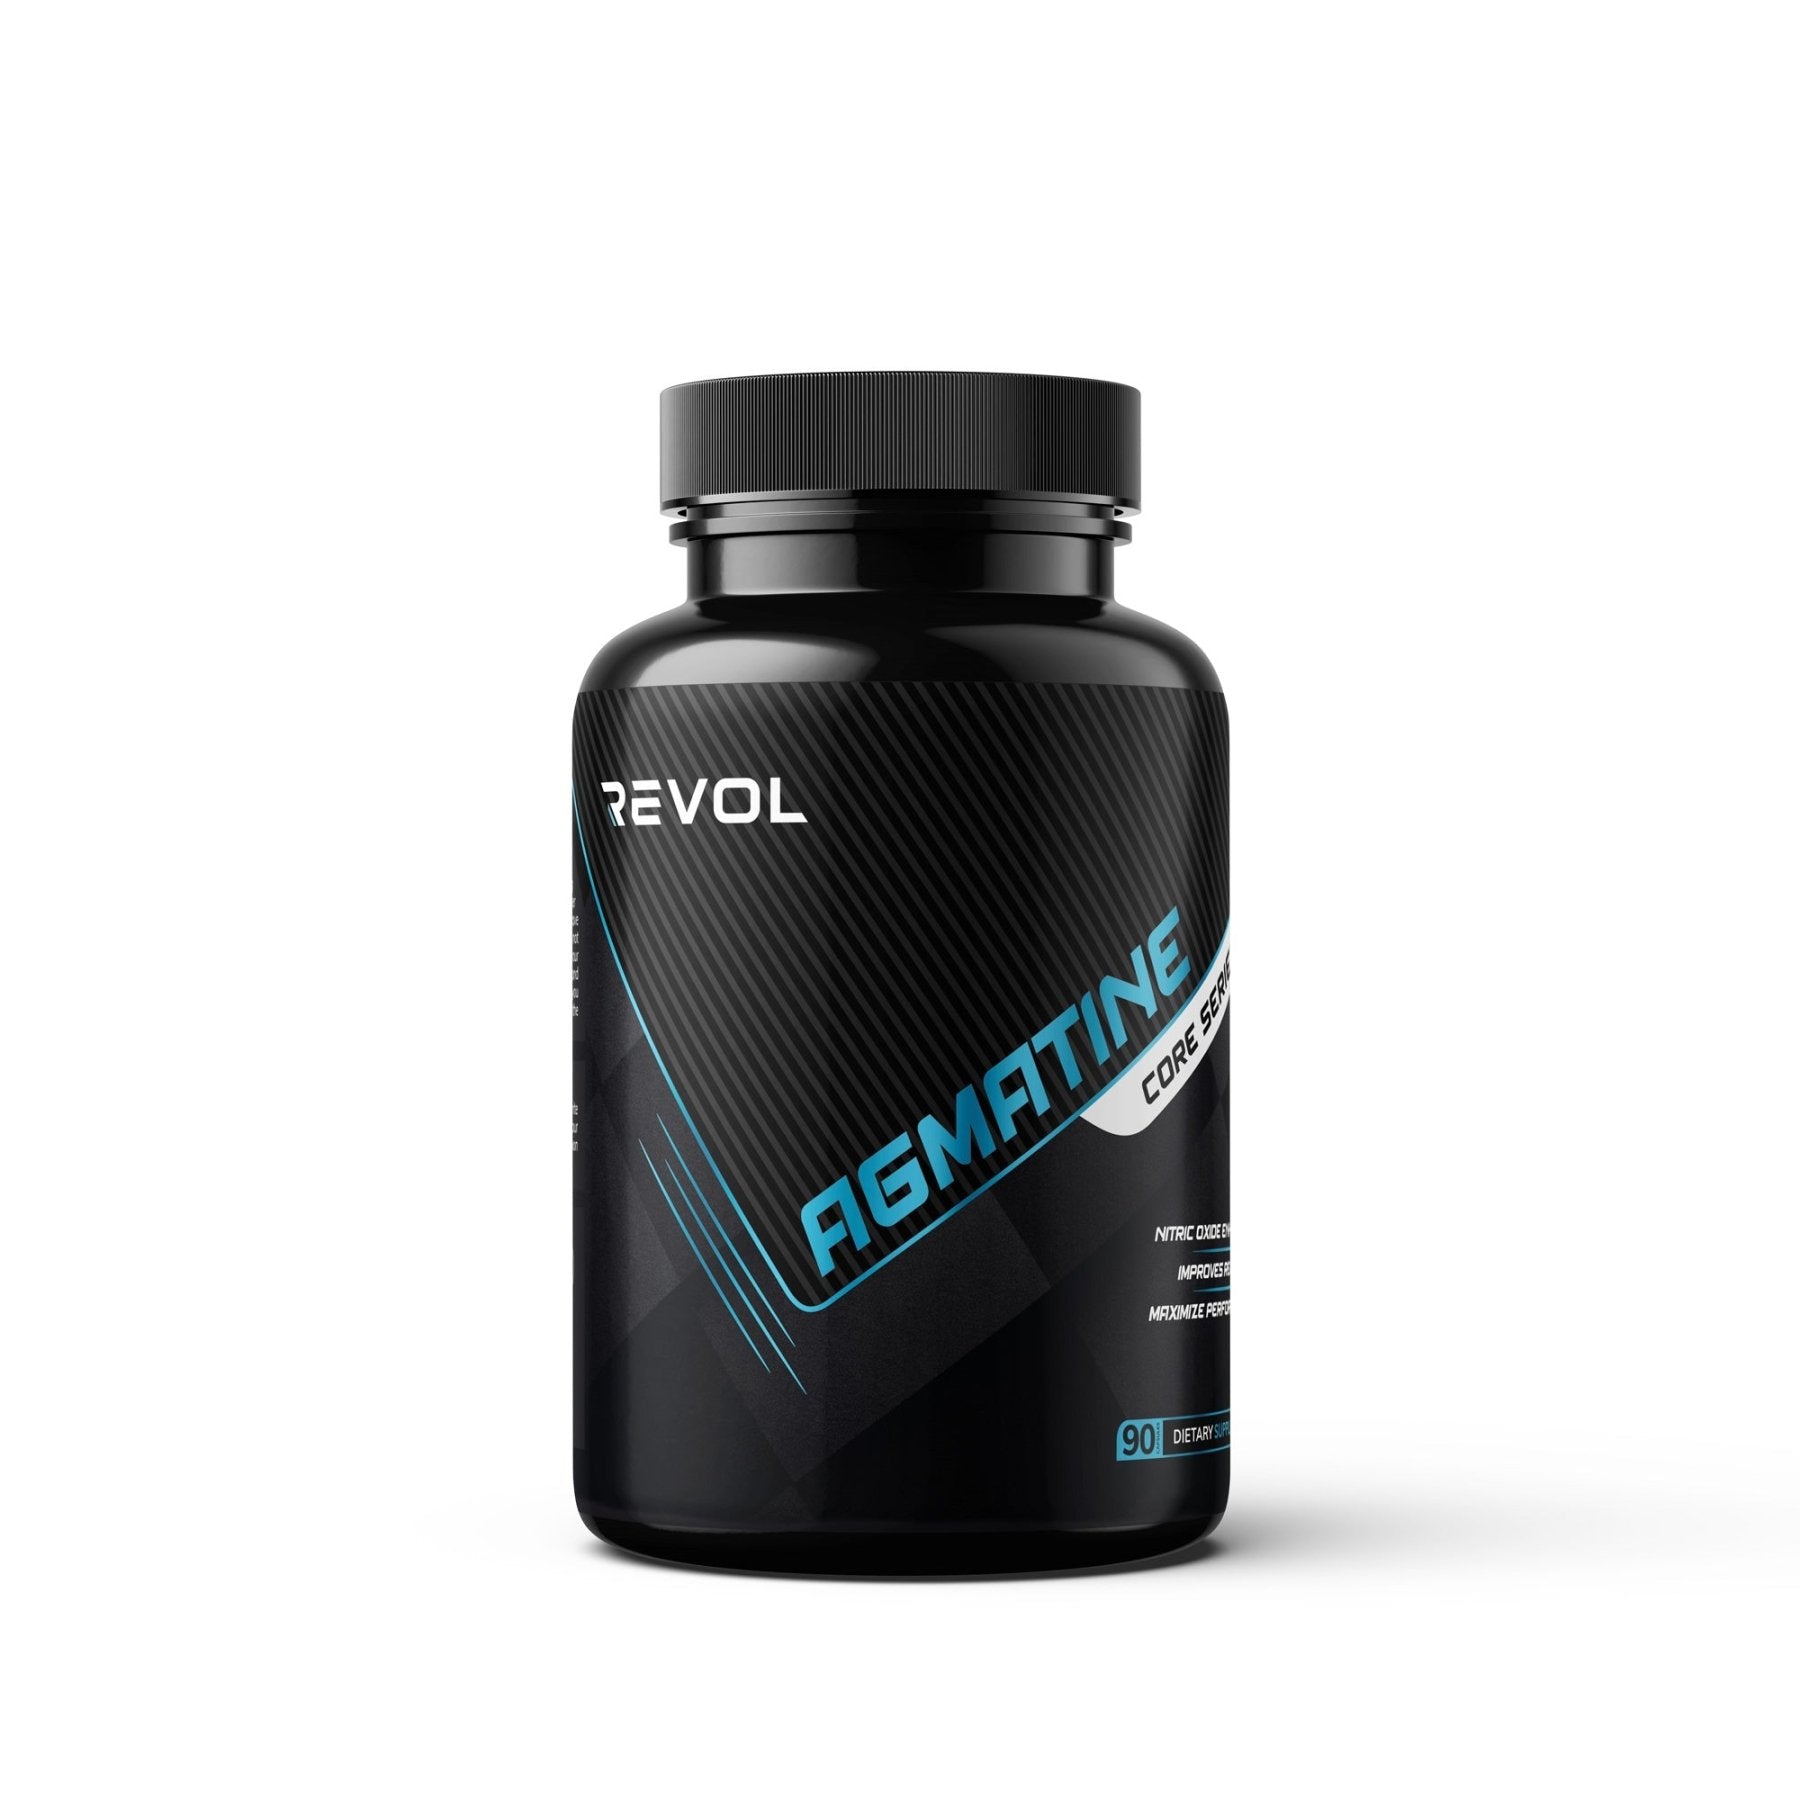 Revol Nutrition Agmatine 90 caps - getboost3d